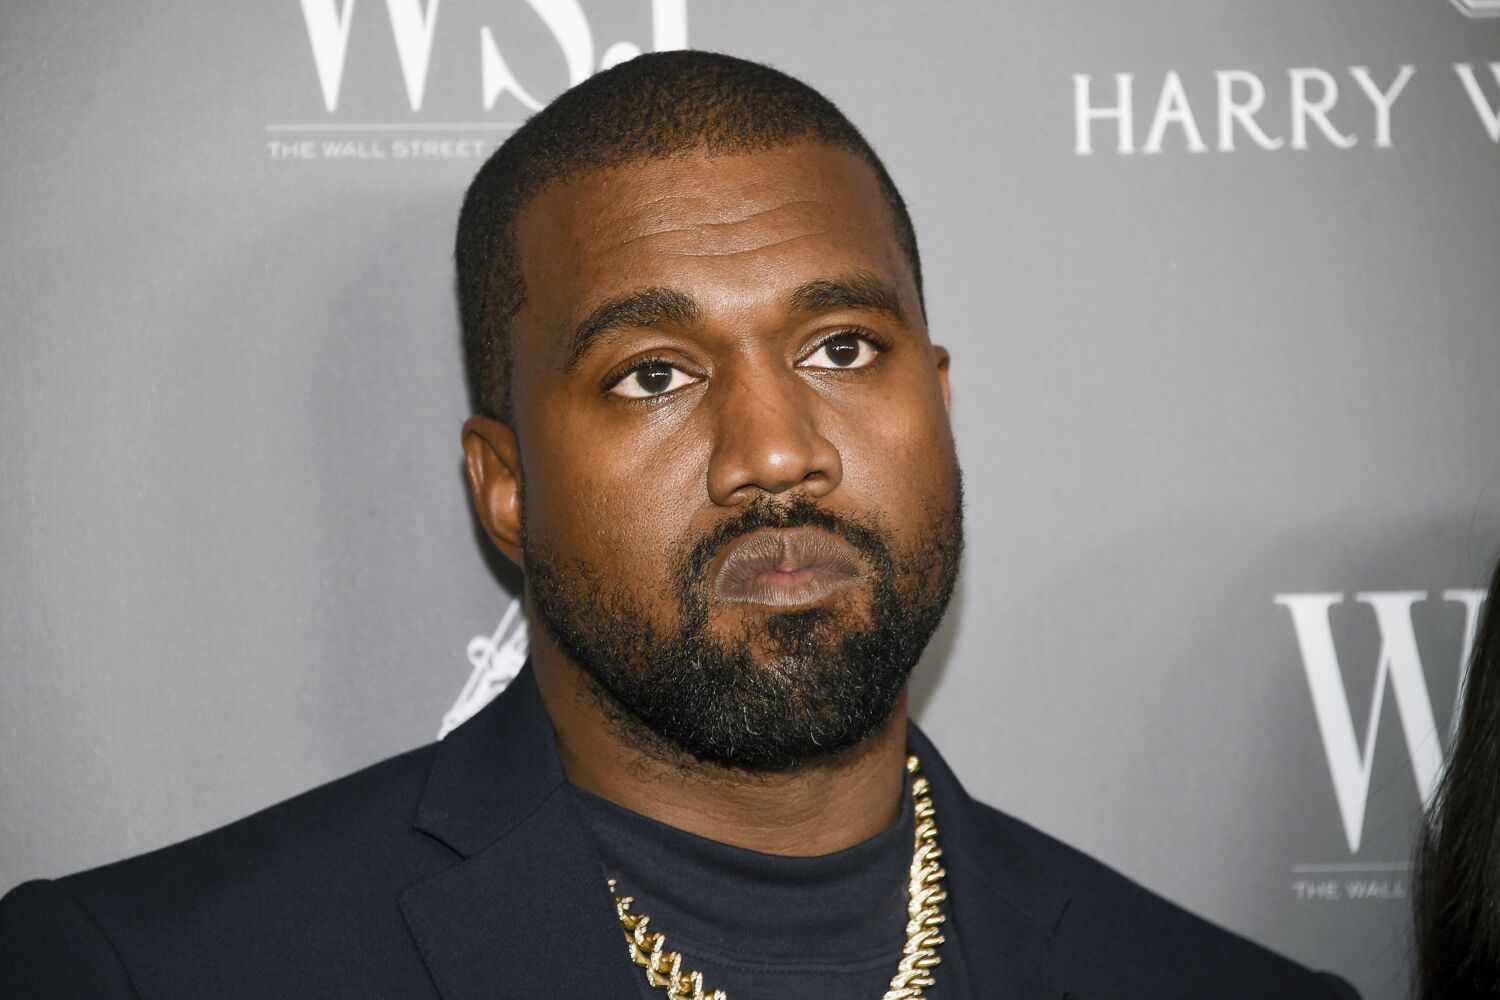 Kanye West changed his Instagram profile pic to this 'Kardashians' star 'out of peace'